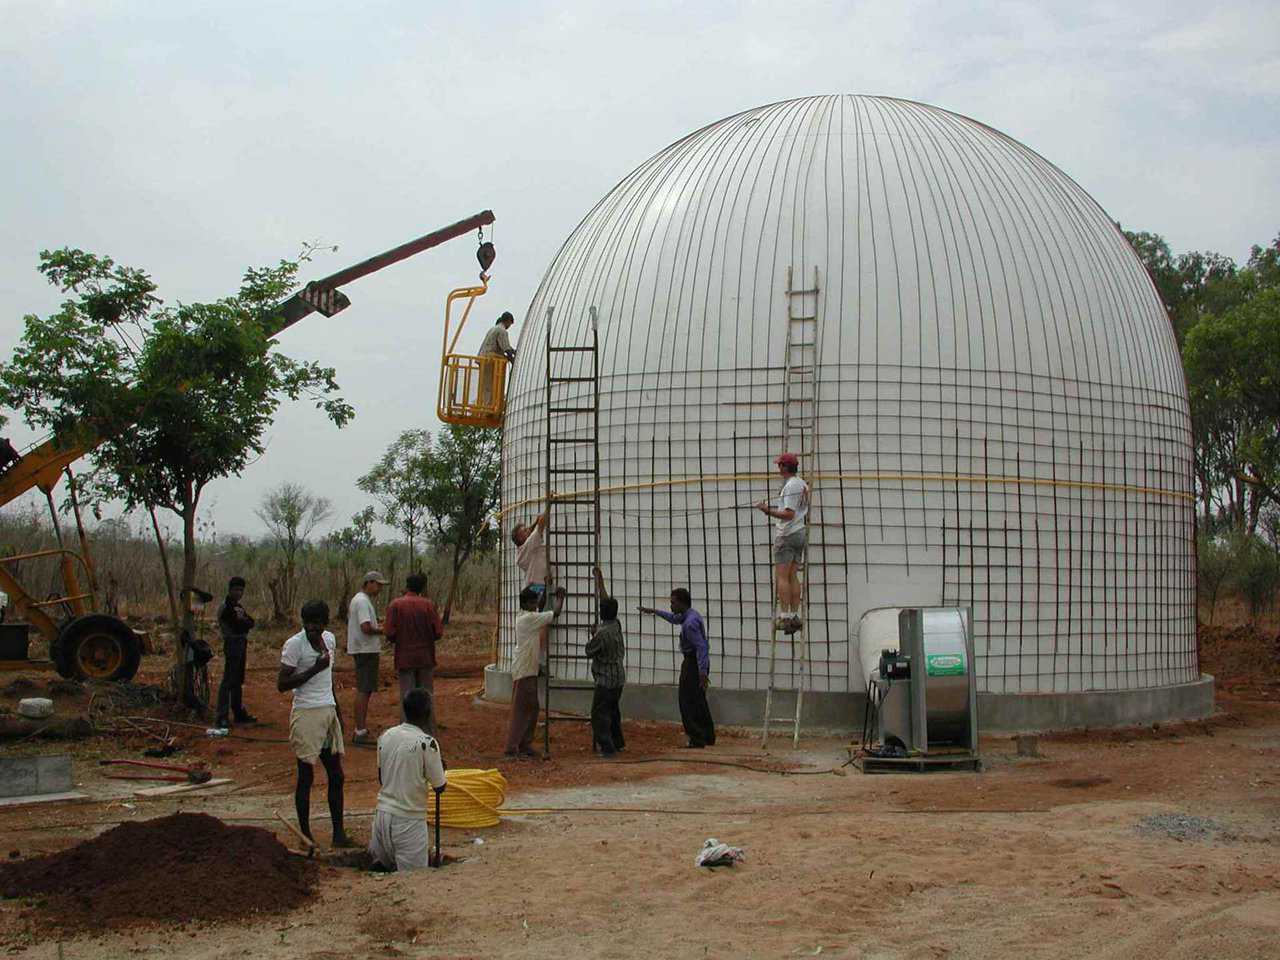 New Oroville, India — These EcoShells are 32 feet in diameter and 26 feet tall.  This company plans on building four thousand more structures.